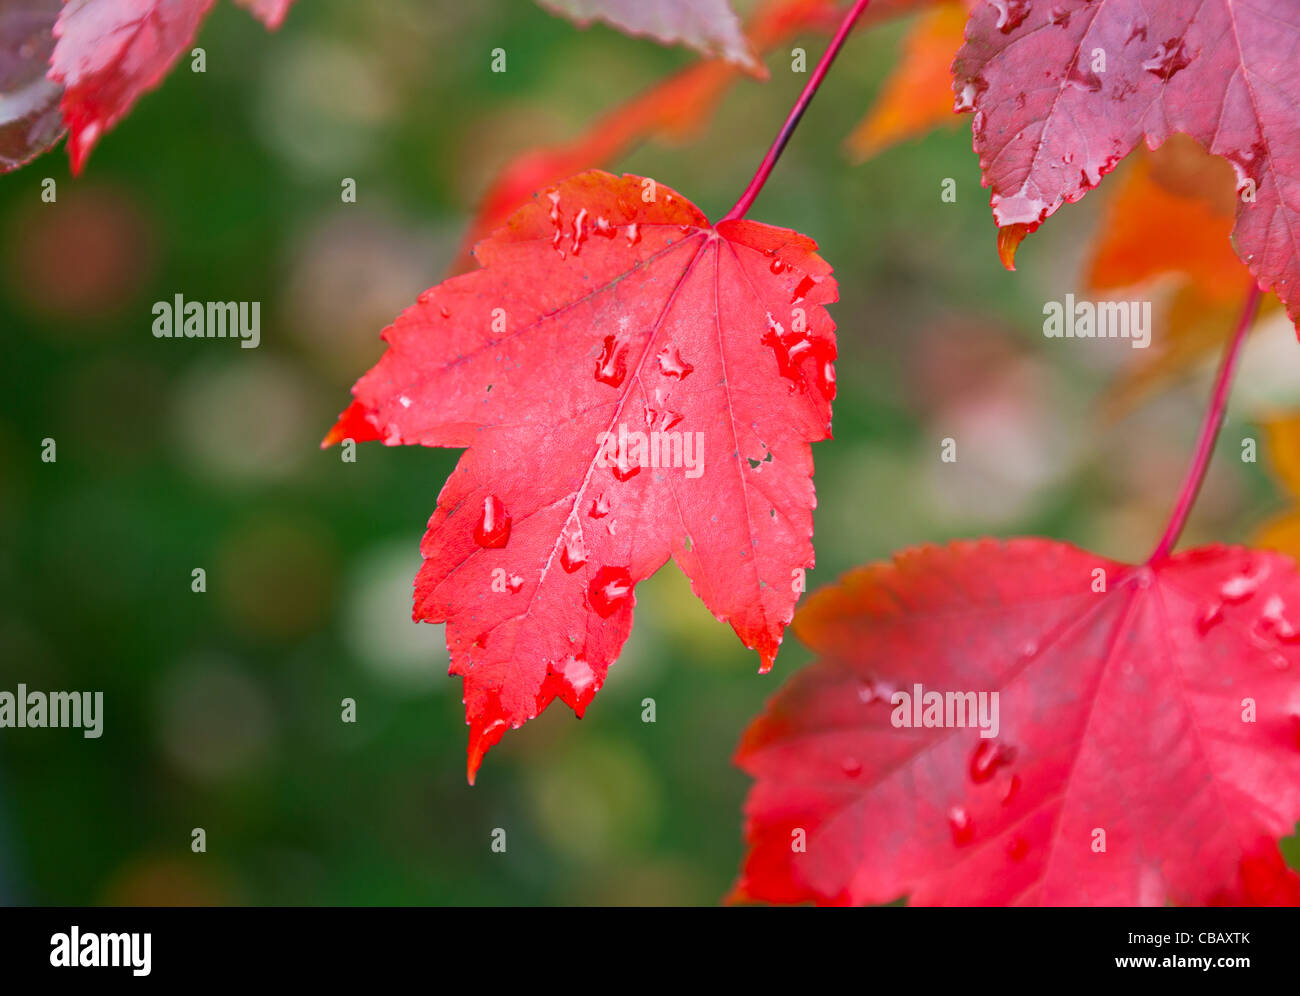 red maple leaves showing bright red autumn colour with water droplets against an out of focus green background Stock Photo